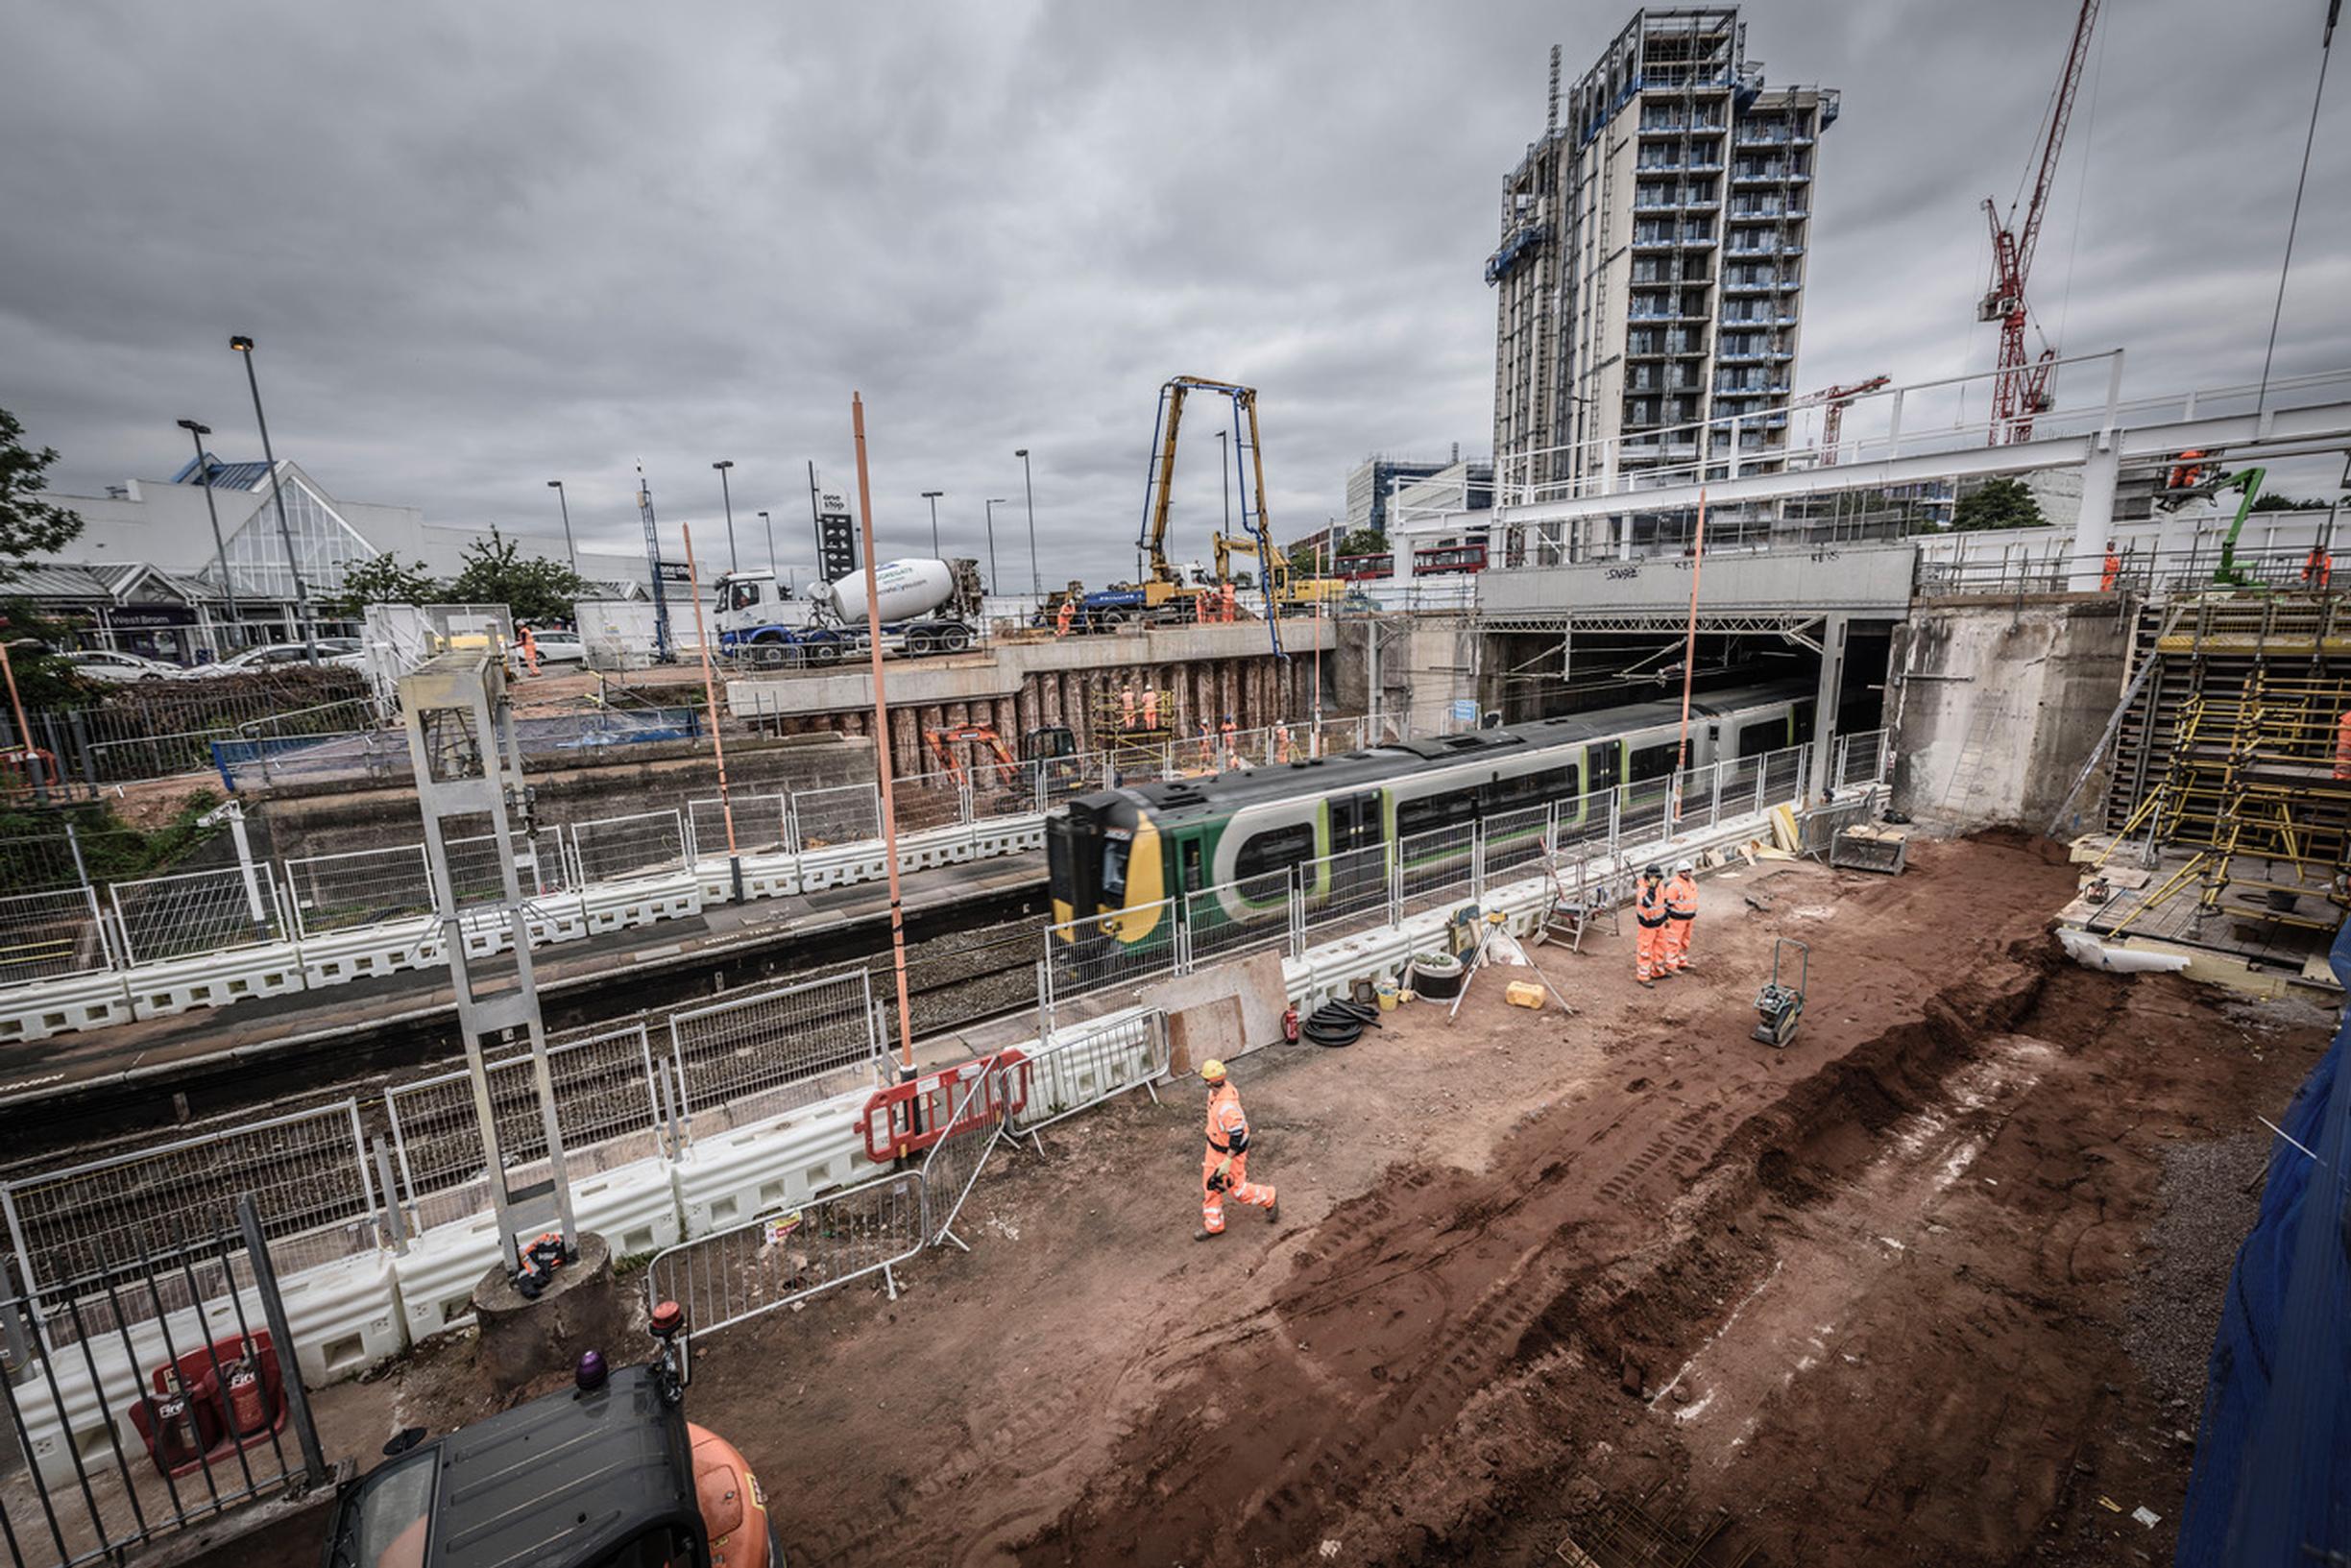 Works are underway at the Perry Barr station site